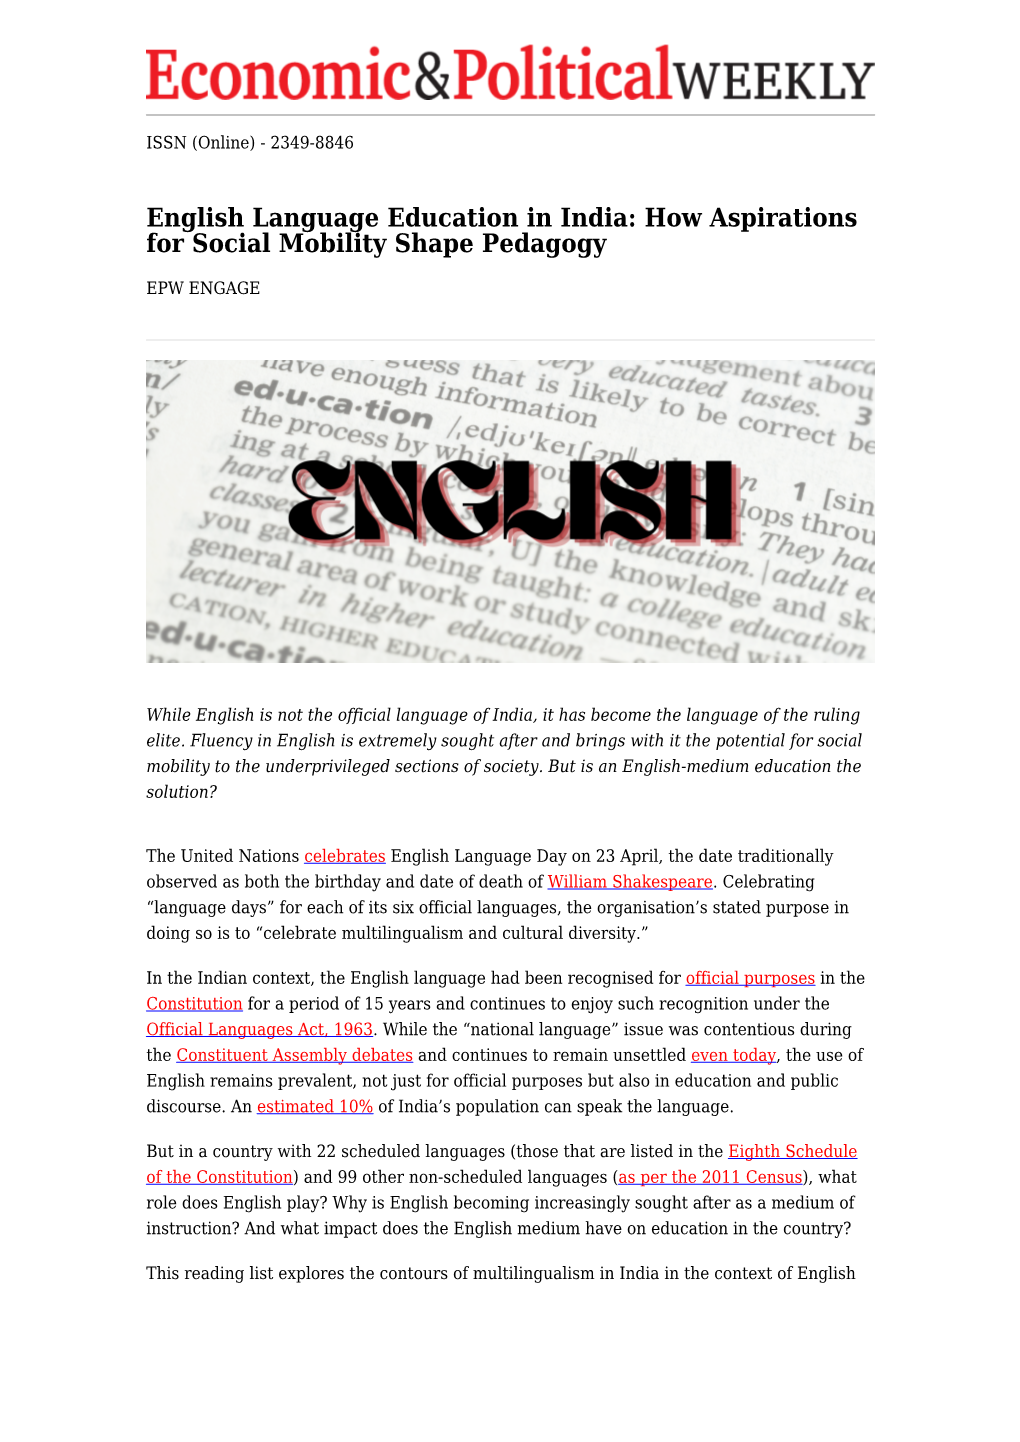 English Language Education in India: How Aspirations for Social Mobility Shape Pedagogy